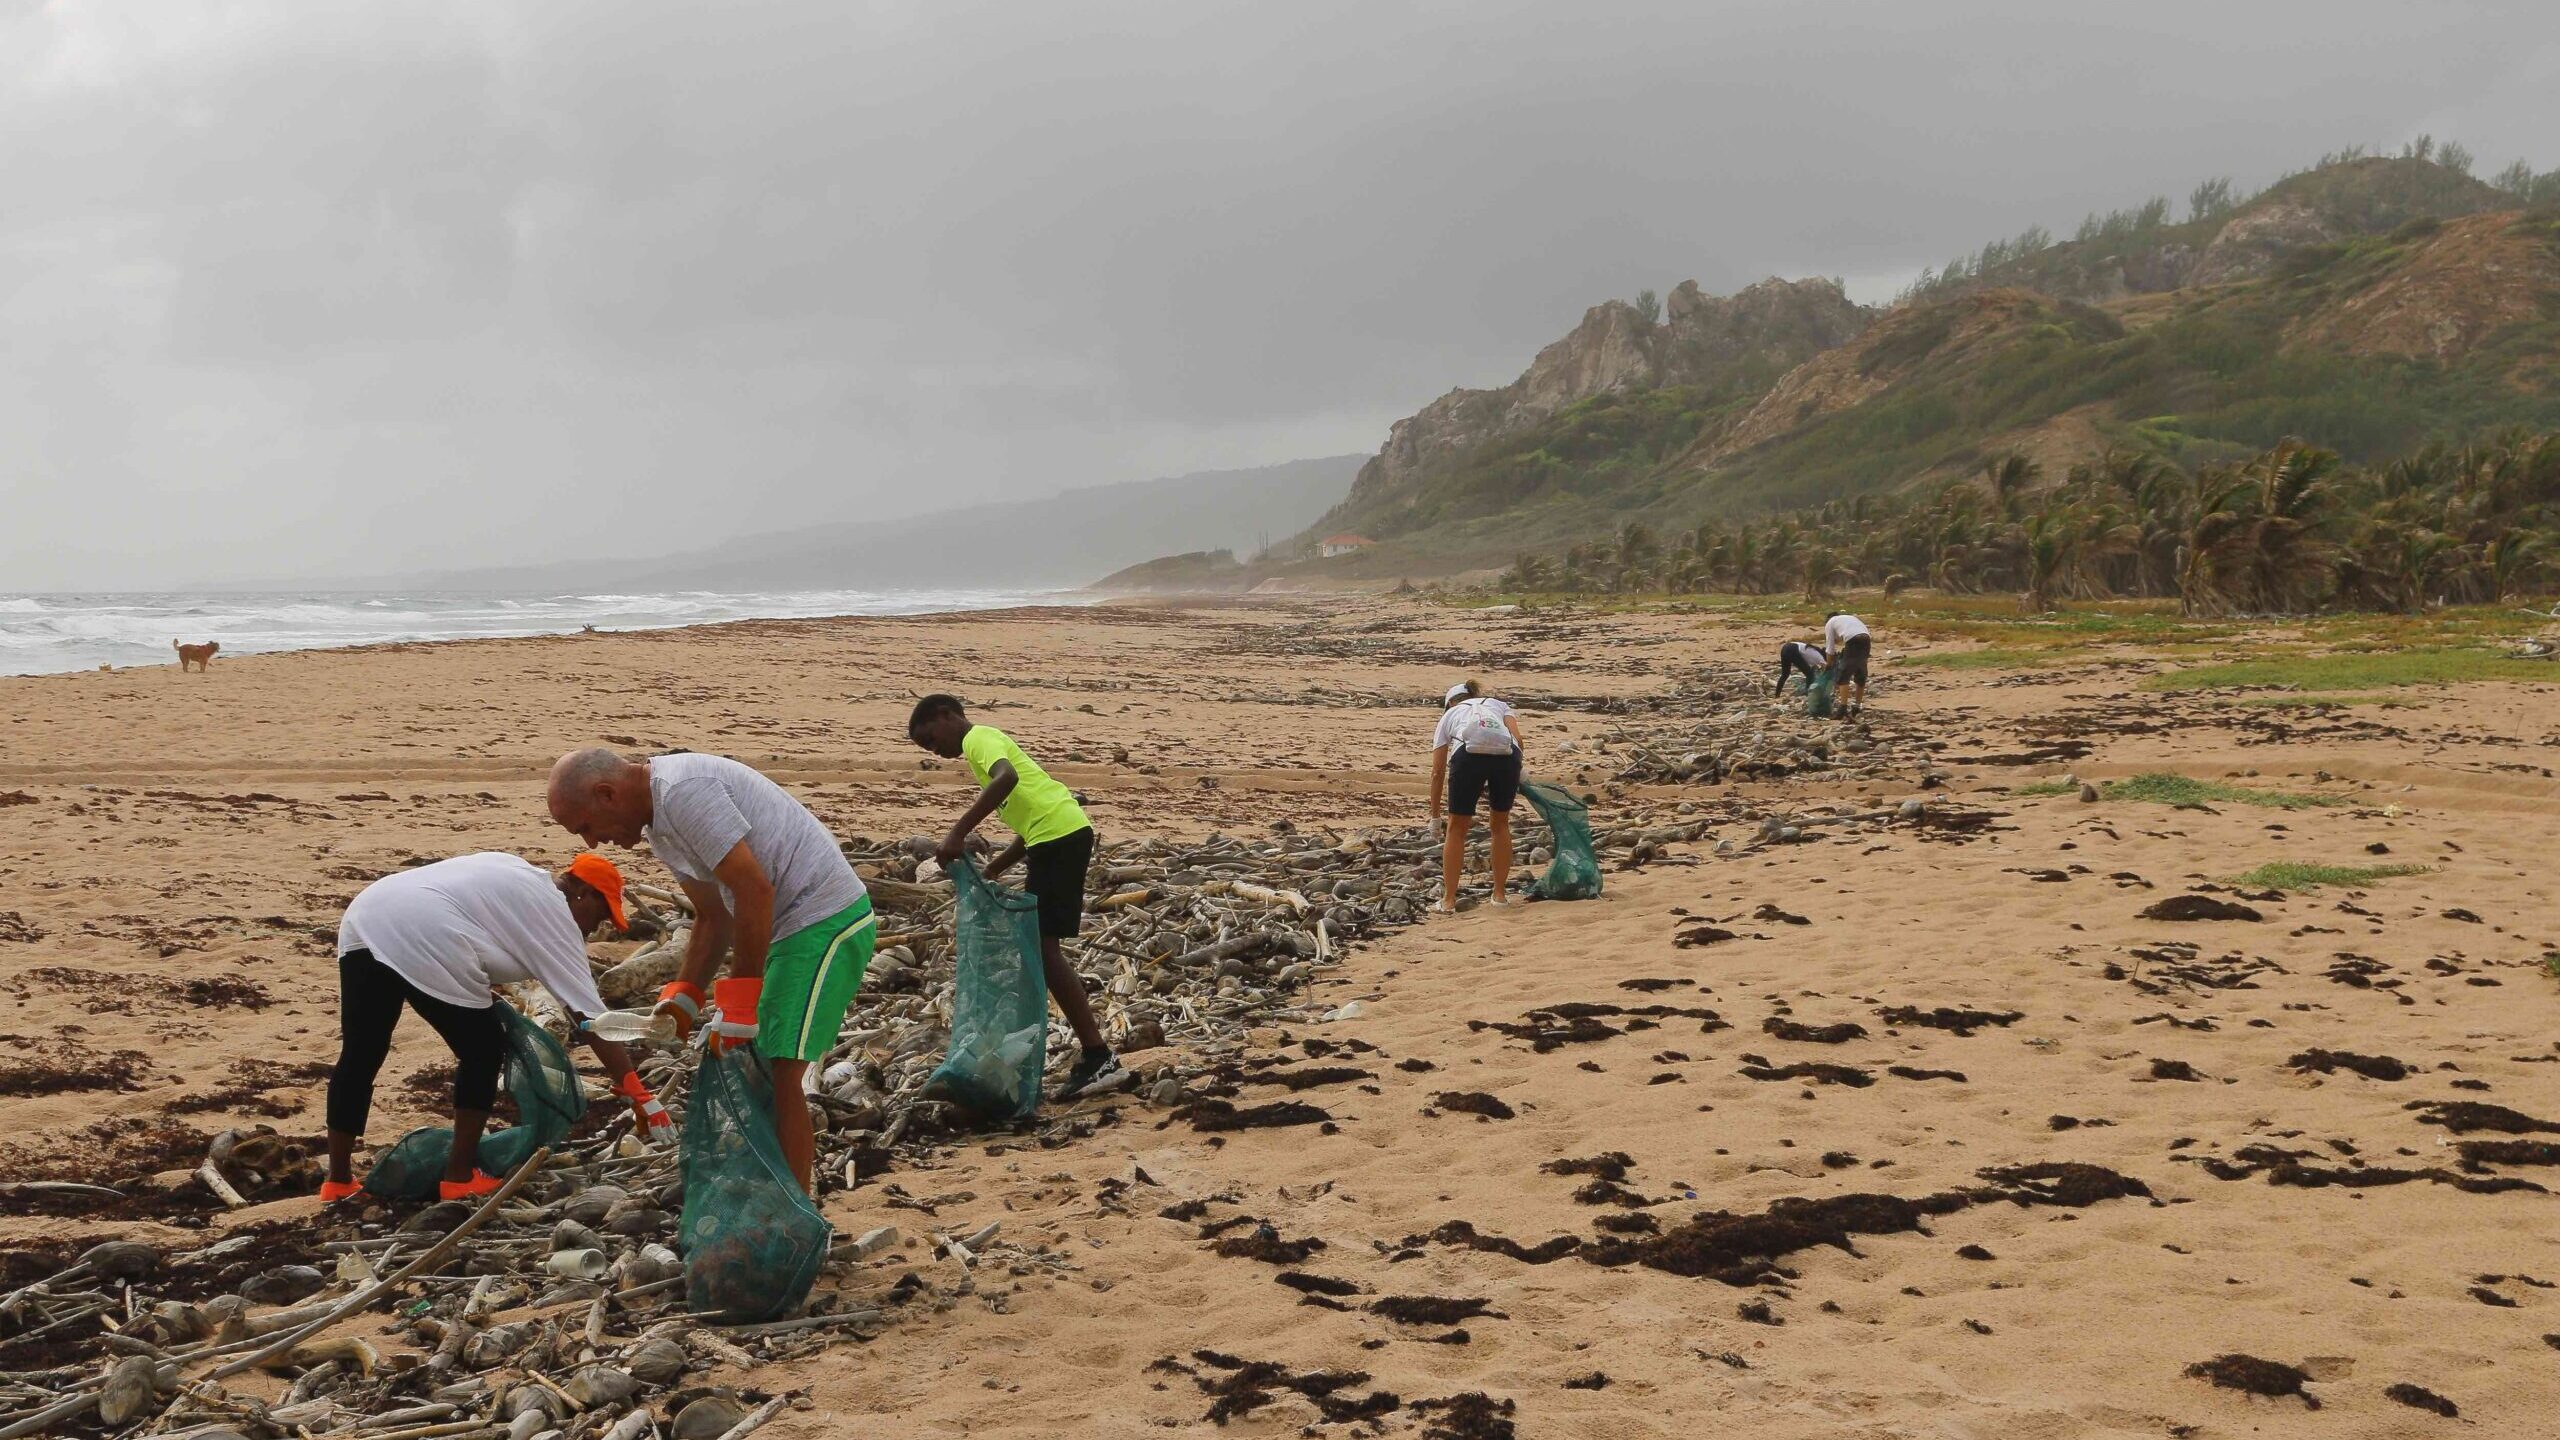 Five individuals collect trash on the beach, putting it into green plastic bags.